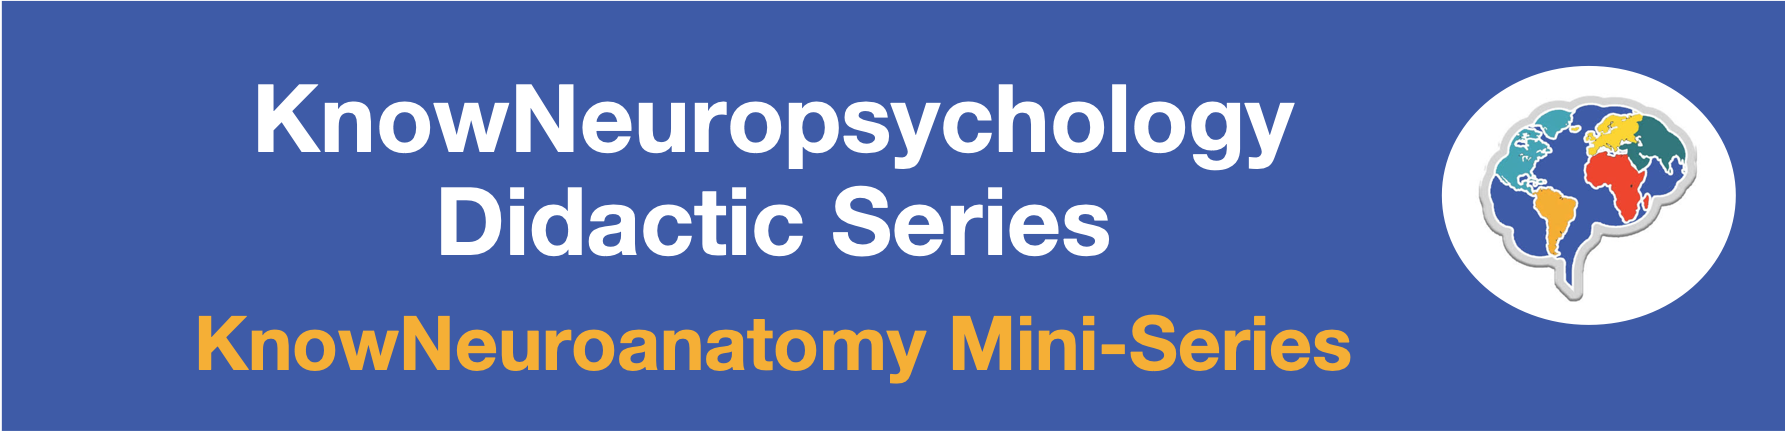 KnowNeuropsychology Didactic Series Know Neuroanatomy Mini series